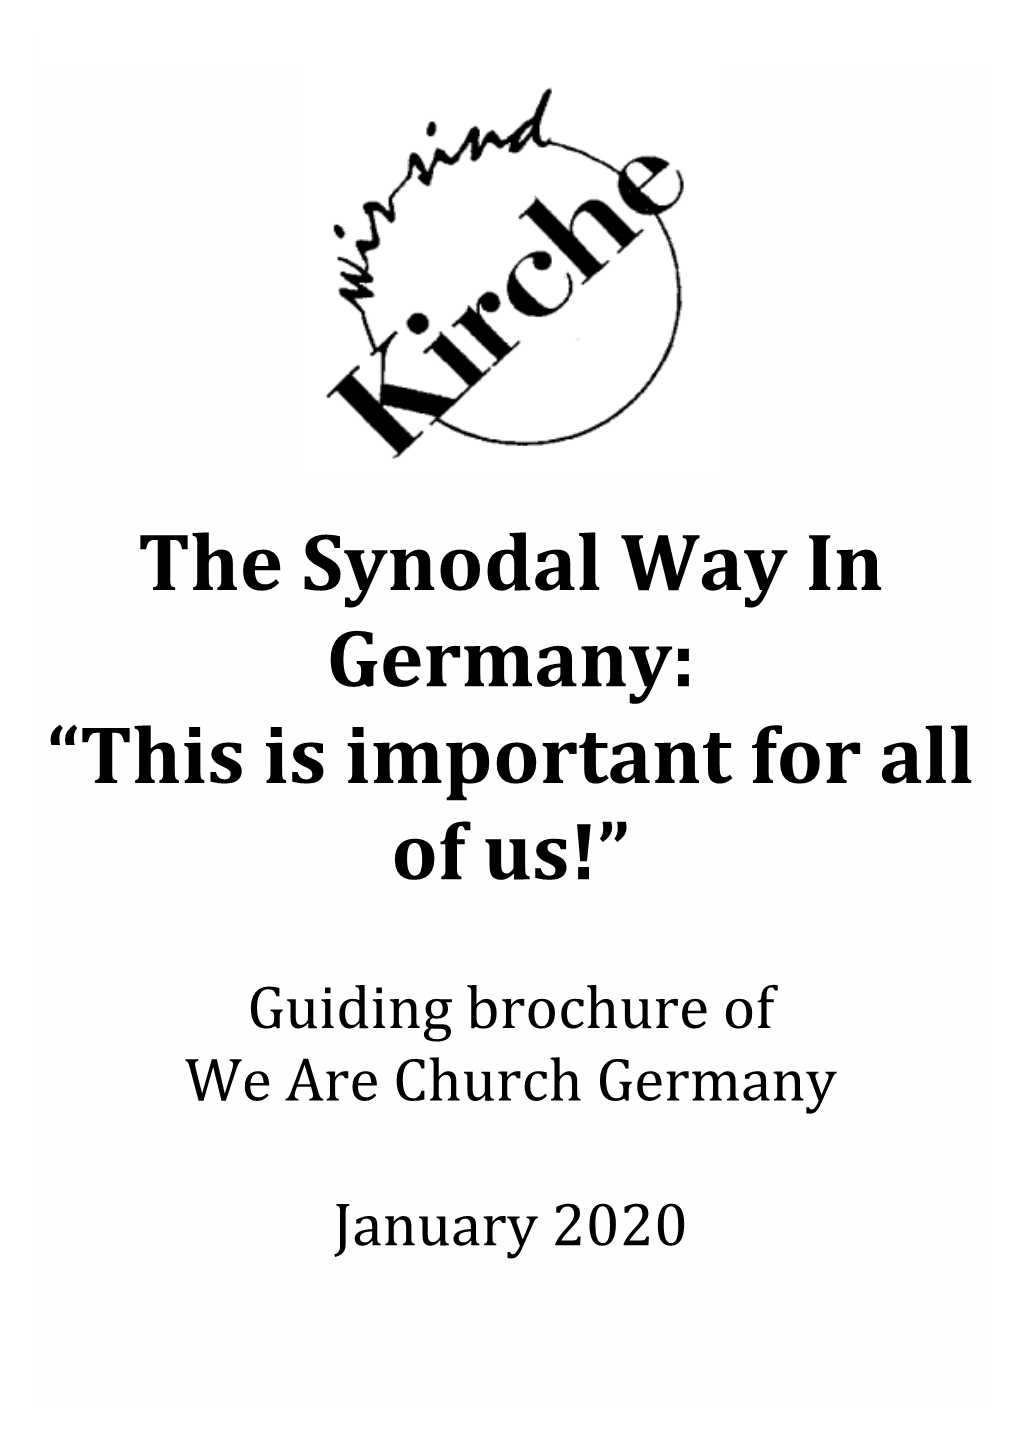 The Synodal Way in Germany: “This Is Important for All of Us!”